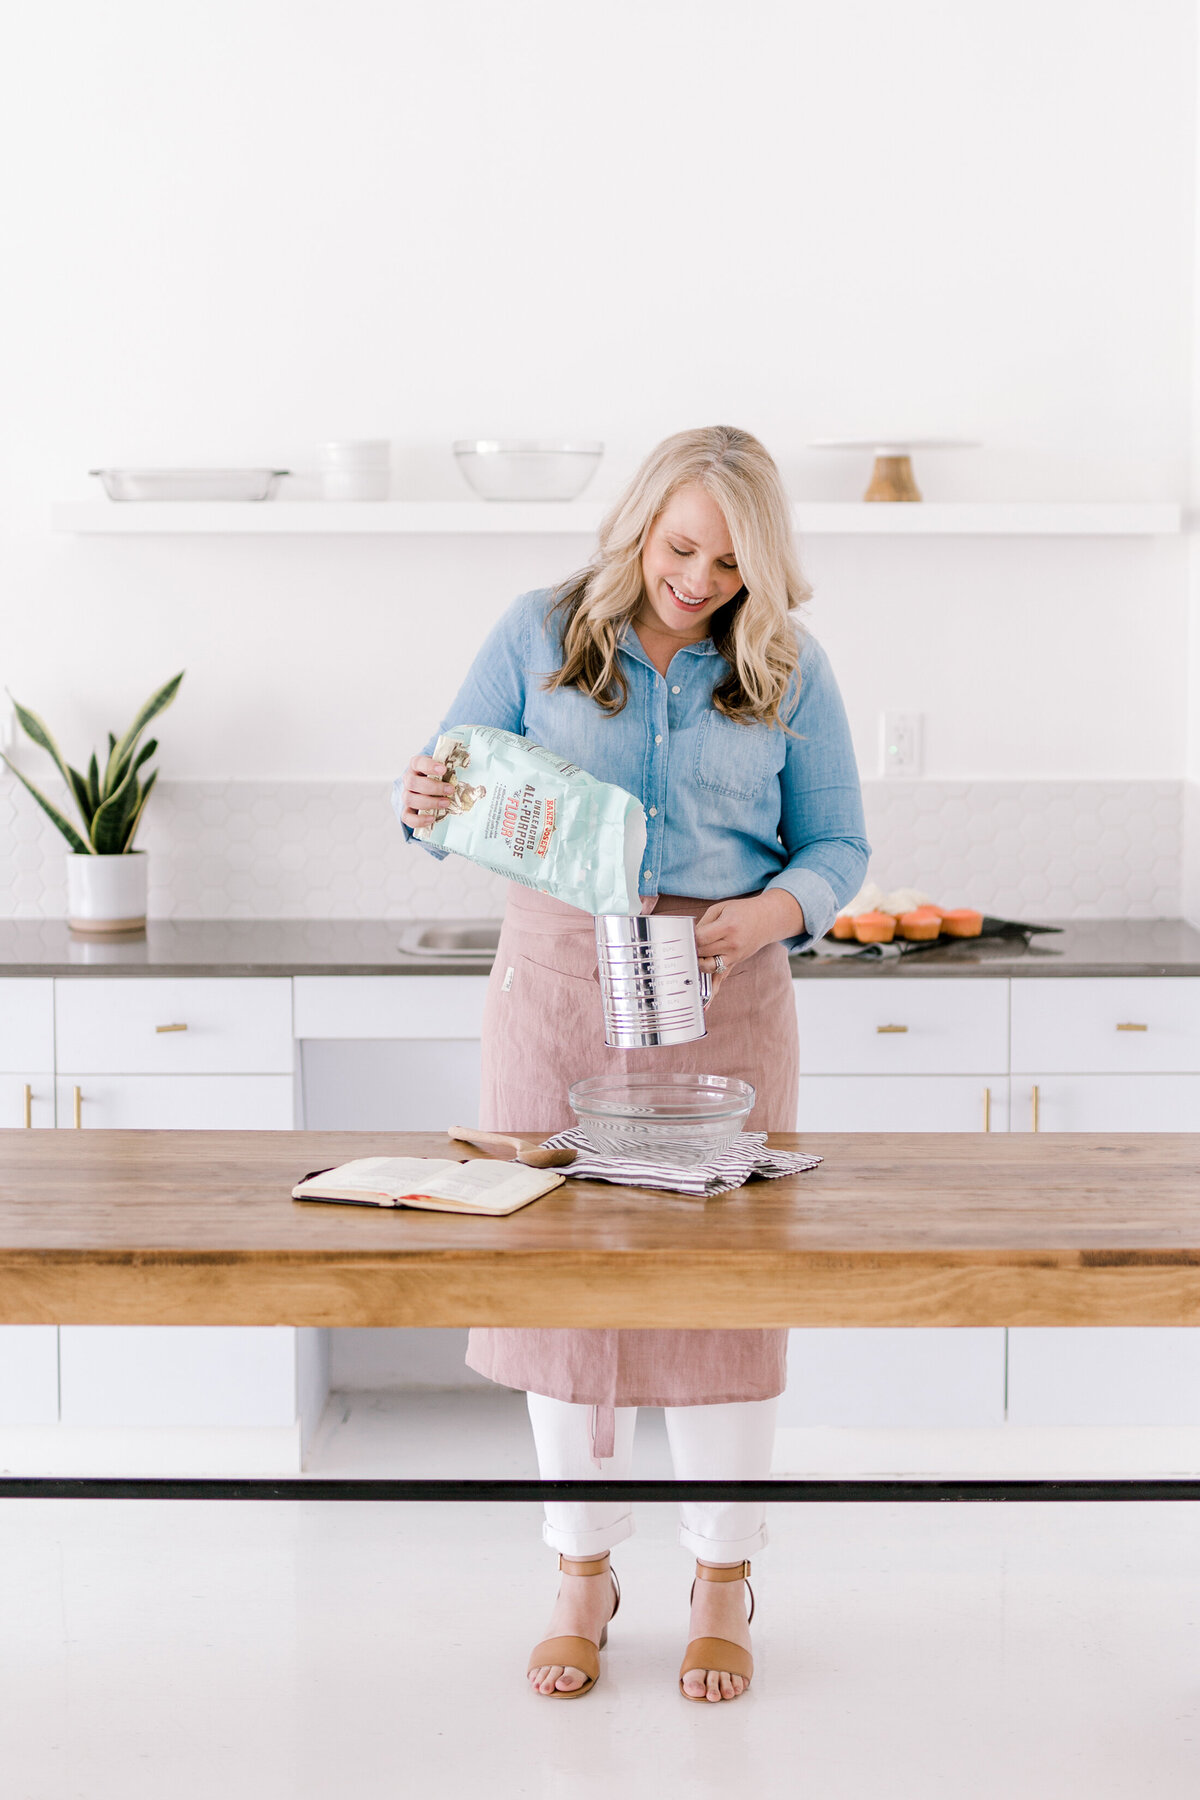 Dallas Brand Photography for Creatives | Laylee Emadi | Catie Ann Baking | Brand Mini Session 3